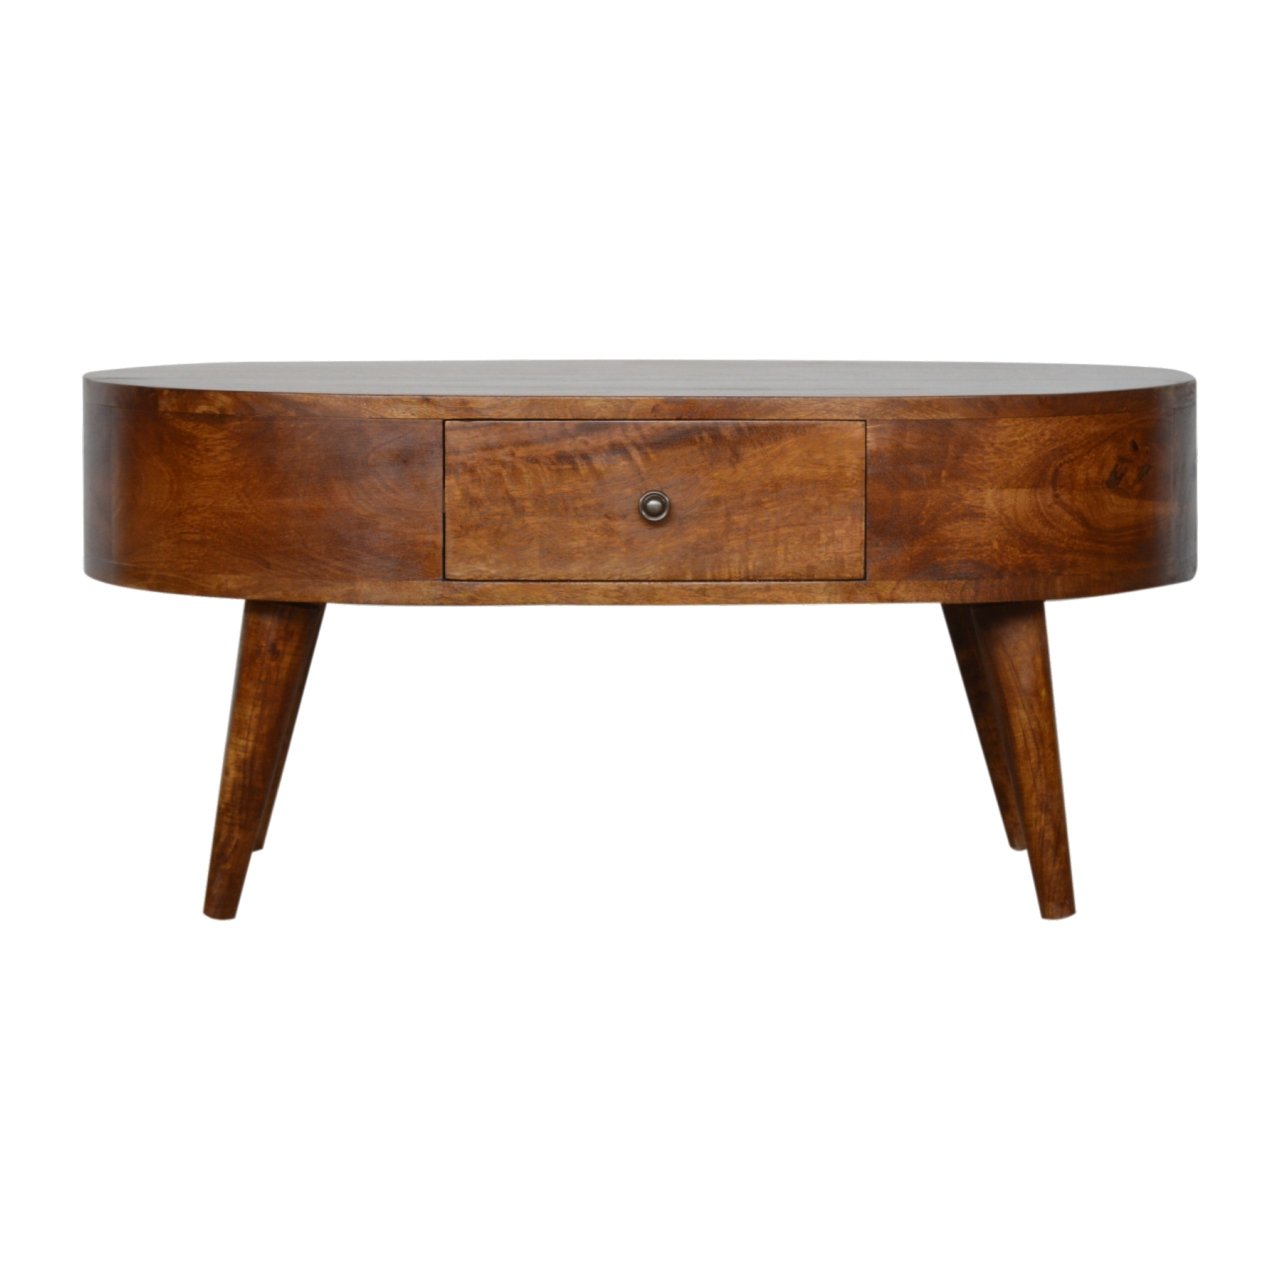 View Chestnut Rounded Coffee Table information